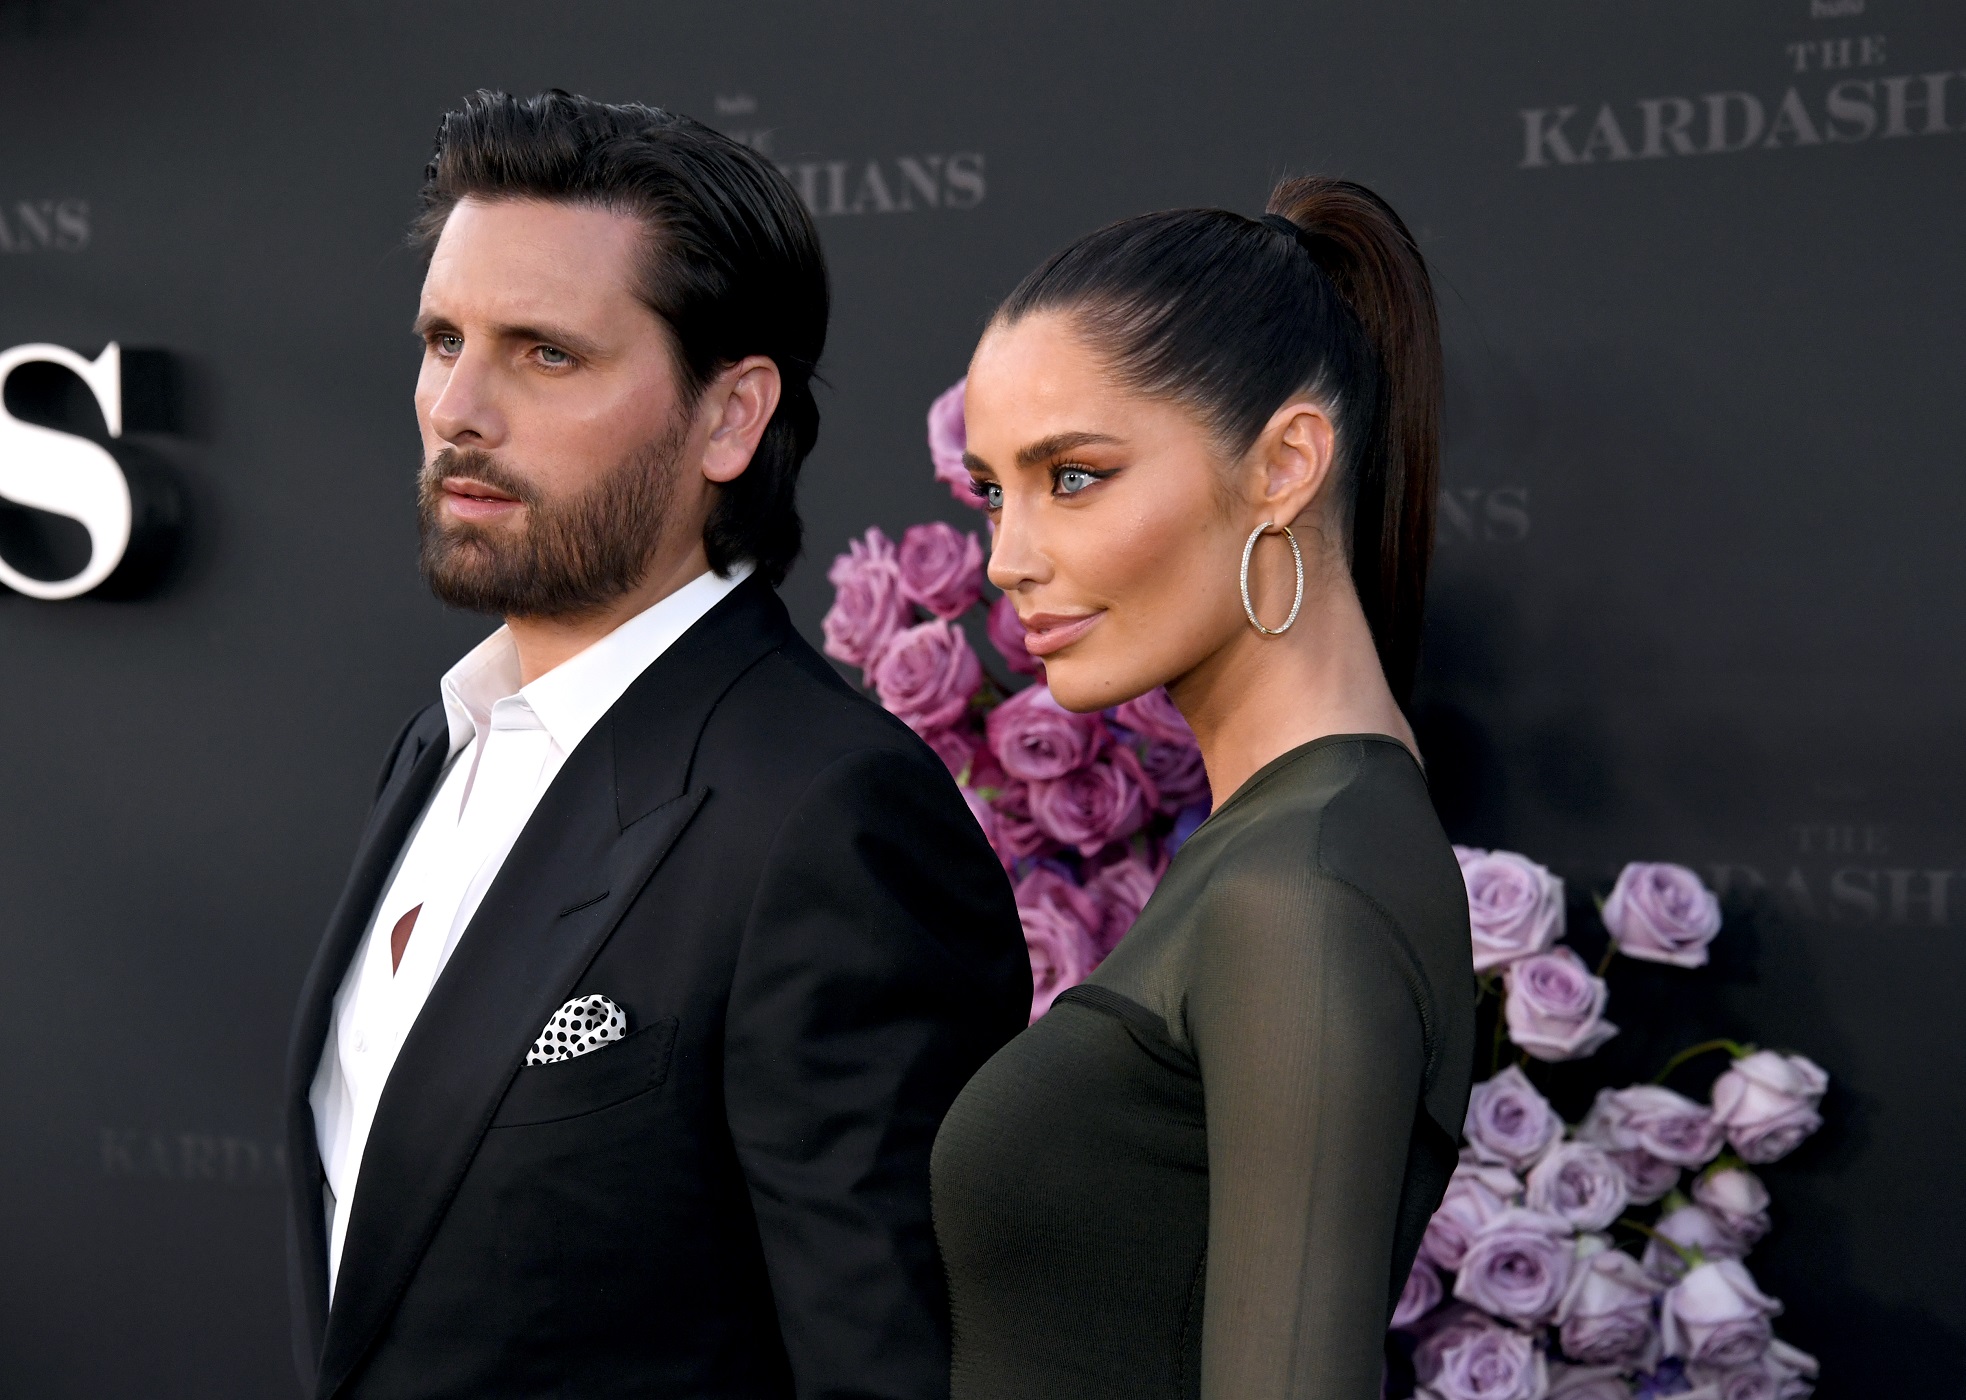 Scott Disick and Rebecca Donaldson are photographed arriving at the permiere of 'The Kardashians'. Donaldson appears to be Scott Disick's newest girlfriend